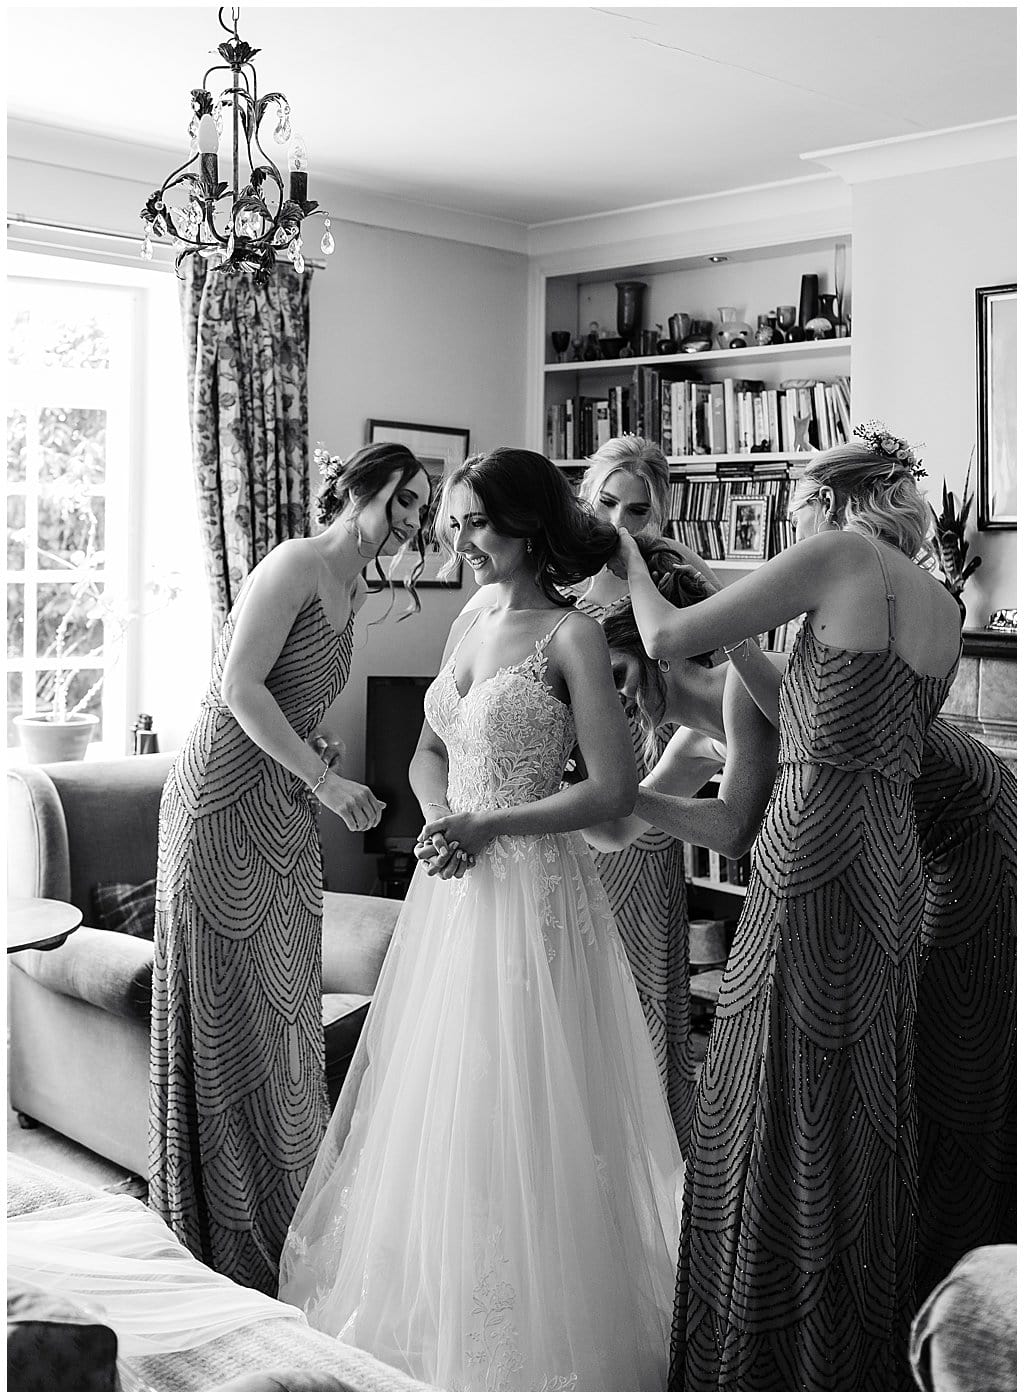 Bride being helped into her wedding dress by bridesmaids